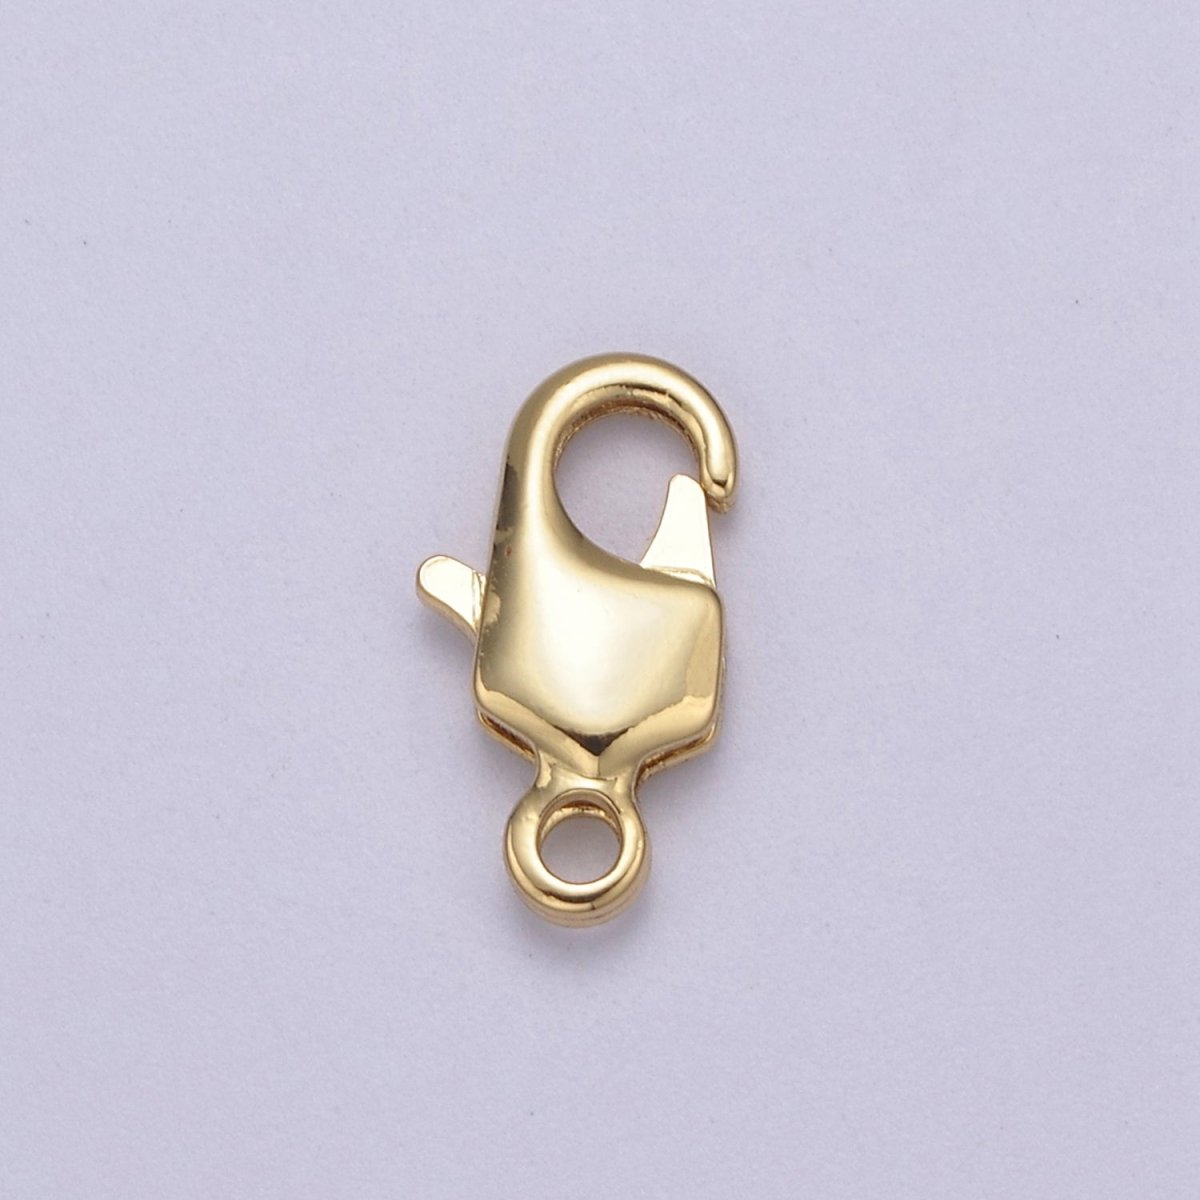 OS 24K Gold Filled 12.5mm x 7mm Rectangular Lobster Clasps Closure Findings L-636 - DLUXCA